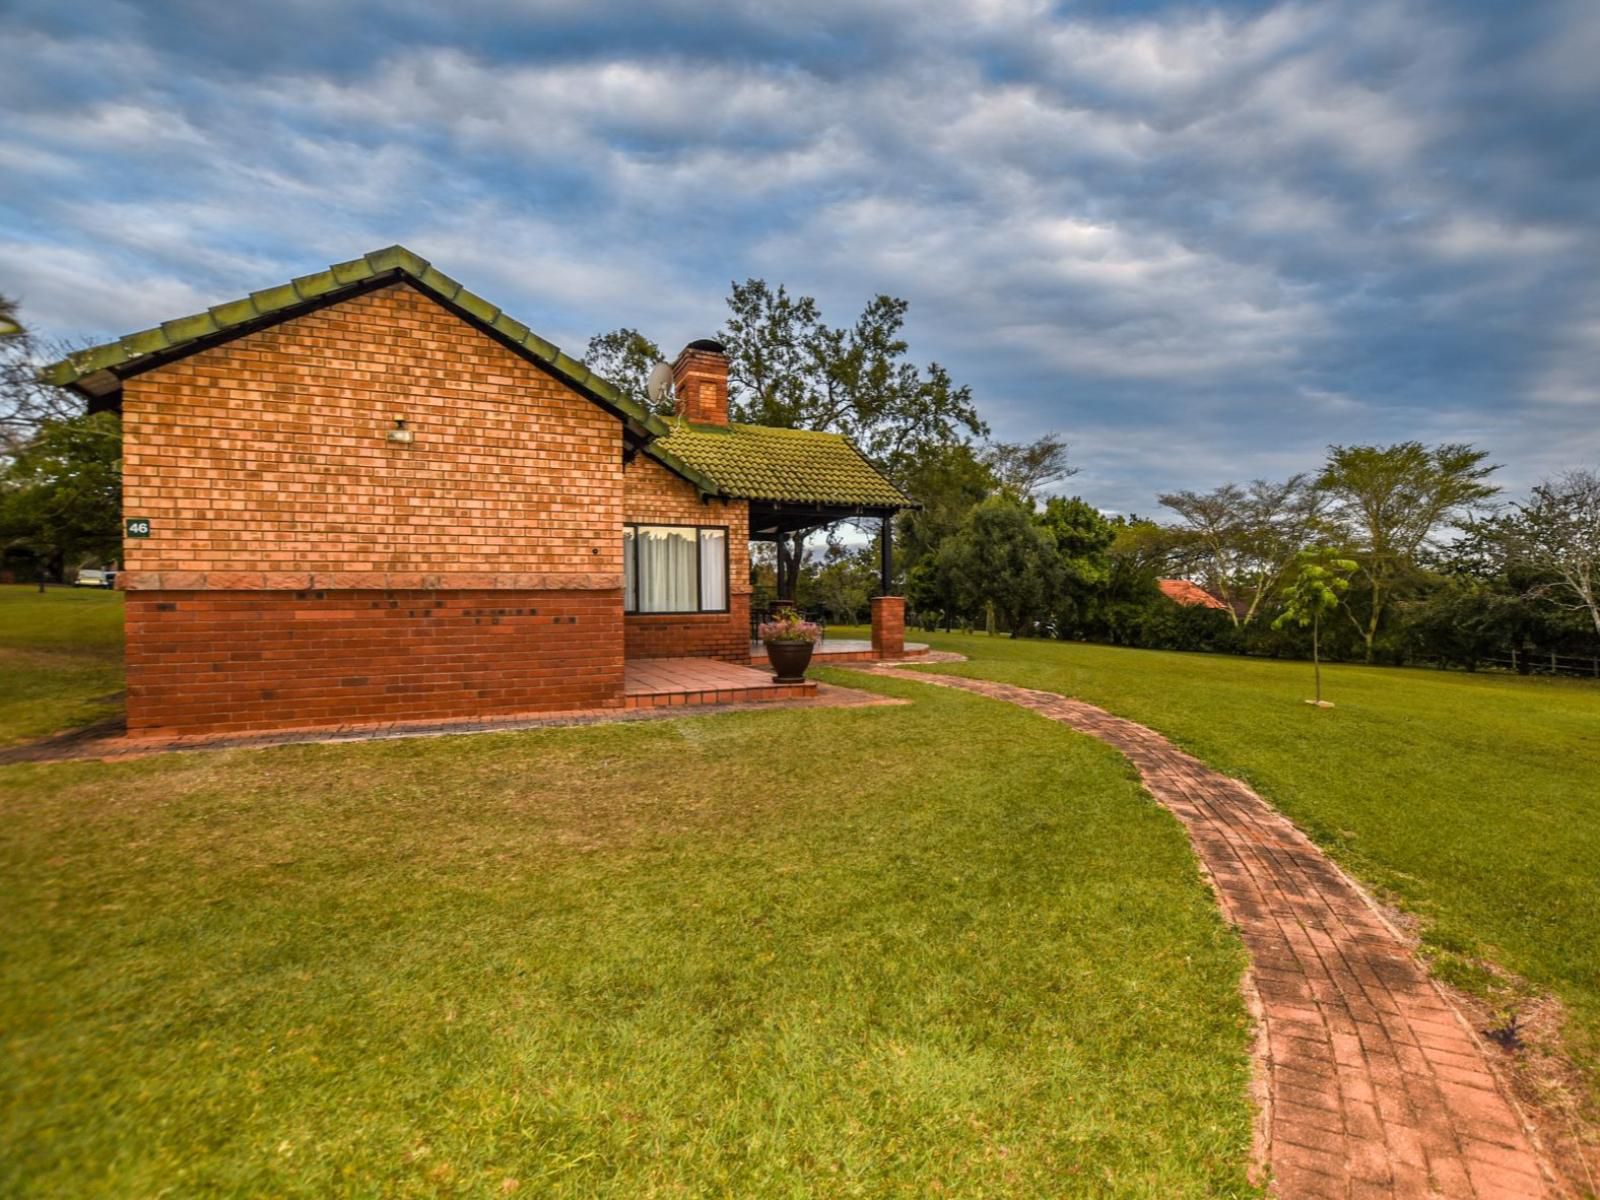 Penny S Place On Greenway White River Country Estates White River Mpumalanga South Africa House, Building, Architecture